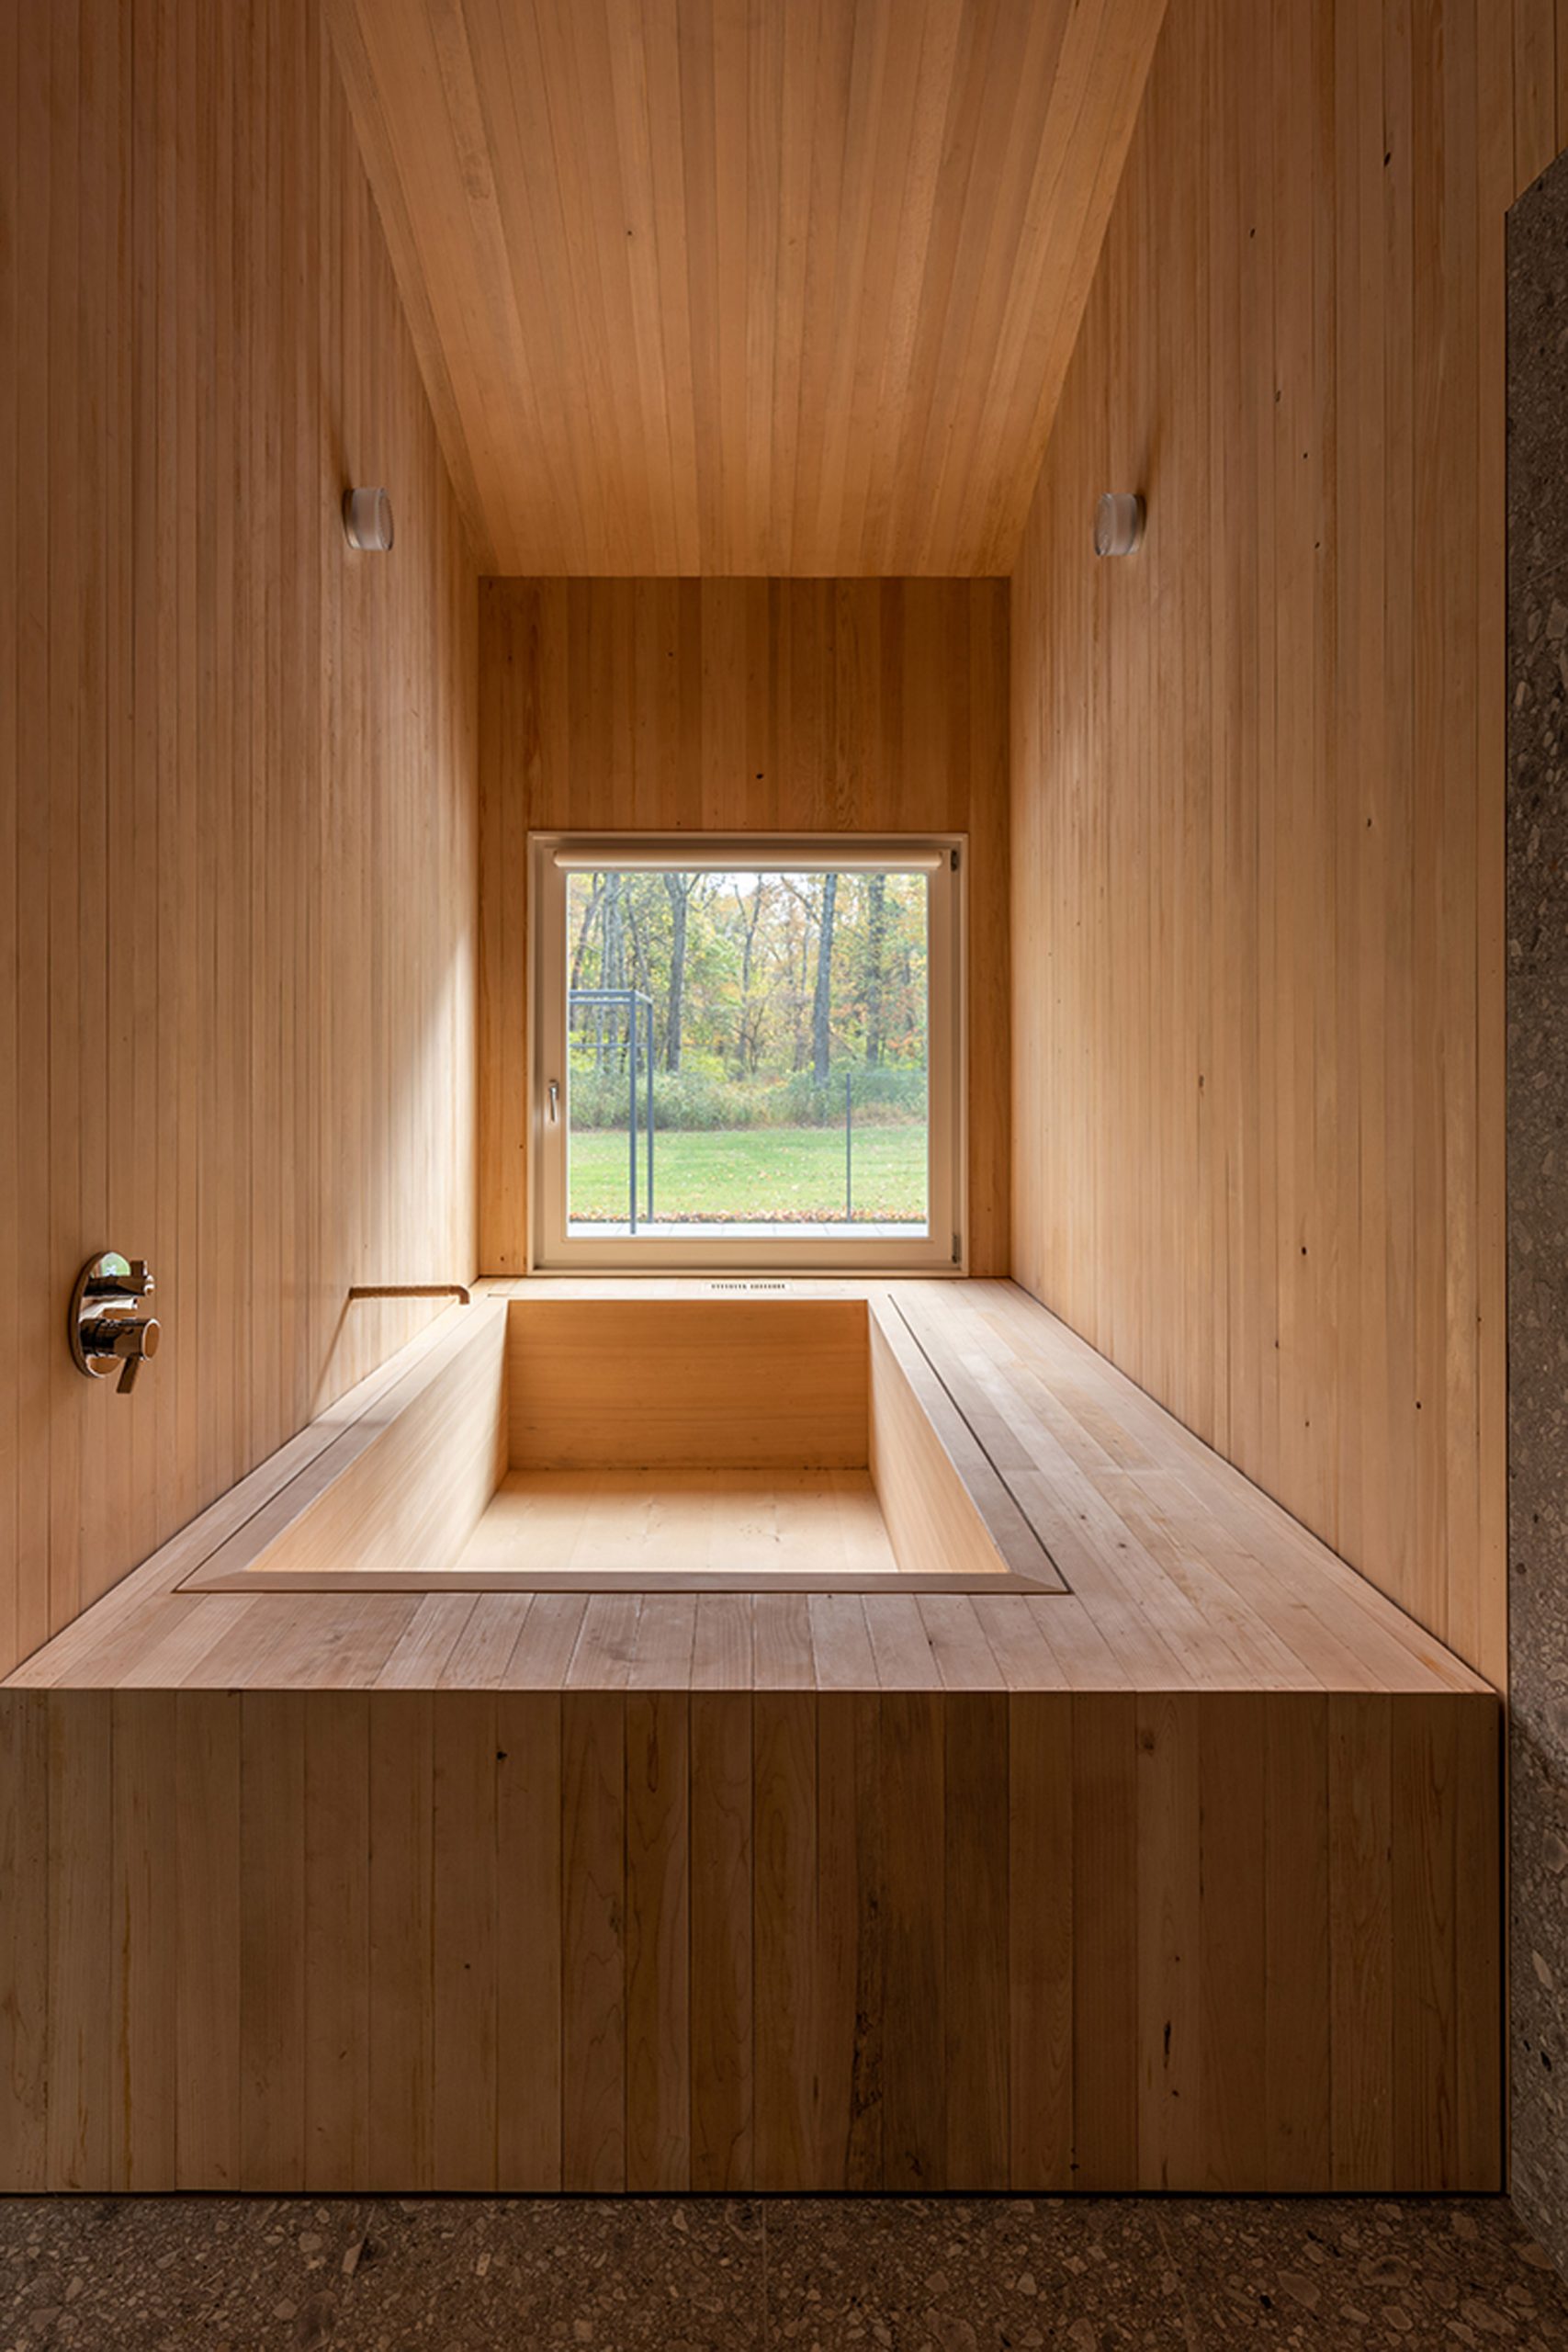 Wooden Japanese sunken bath with a view